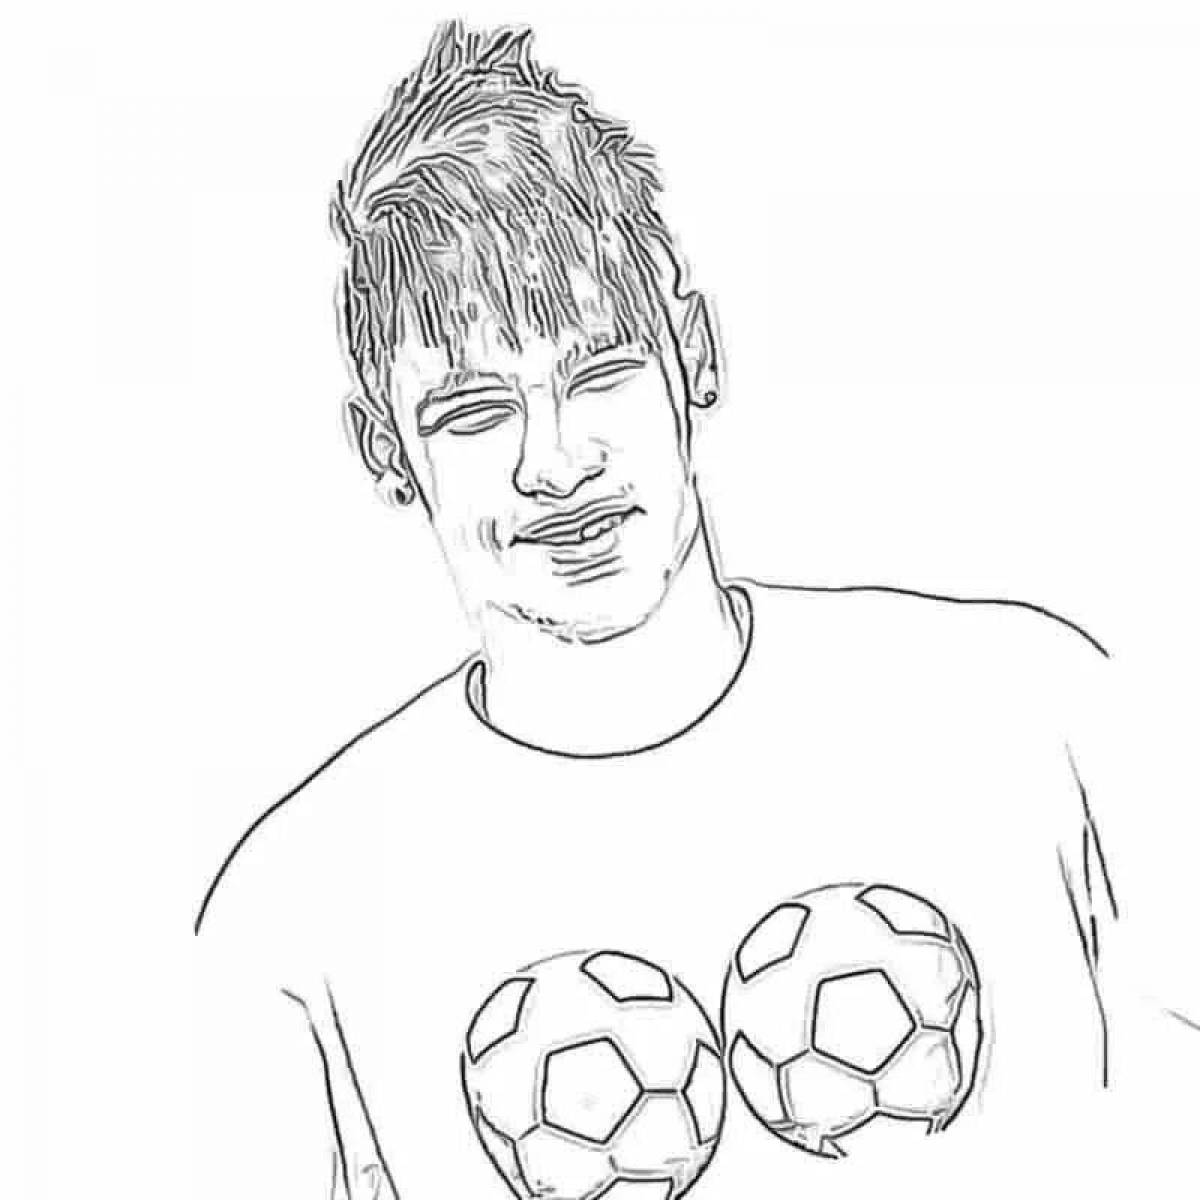 Neymar bold soccer player coloring page